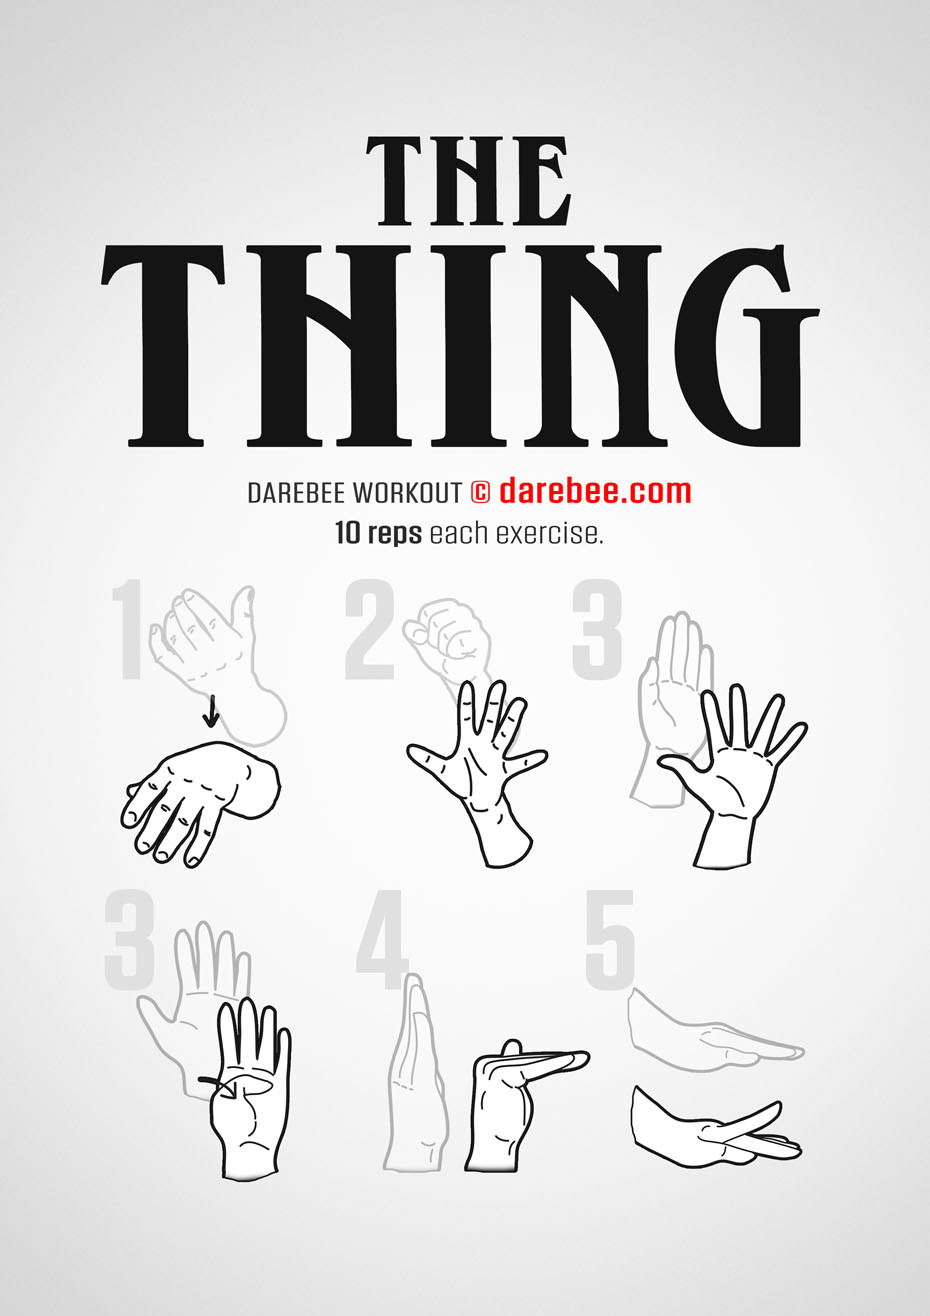 The Thing is a Darebee home-fitness wrist strength and tendon strength workout that will help your wrists stay strong and healthy.